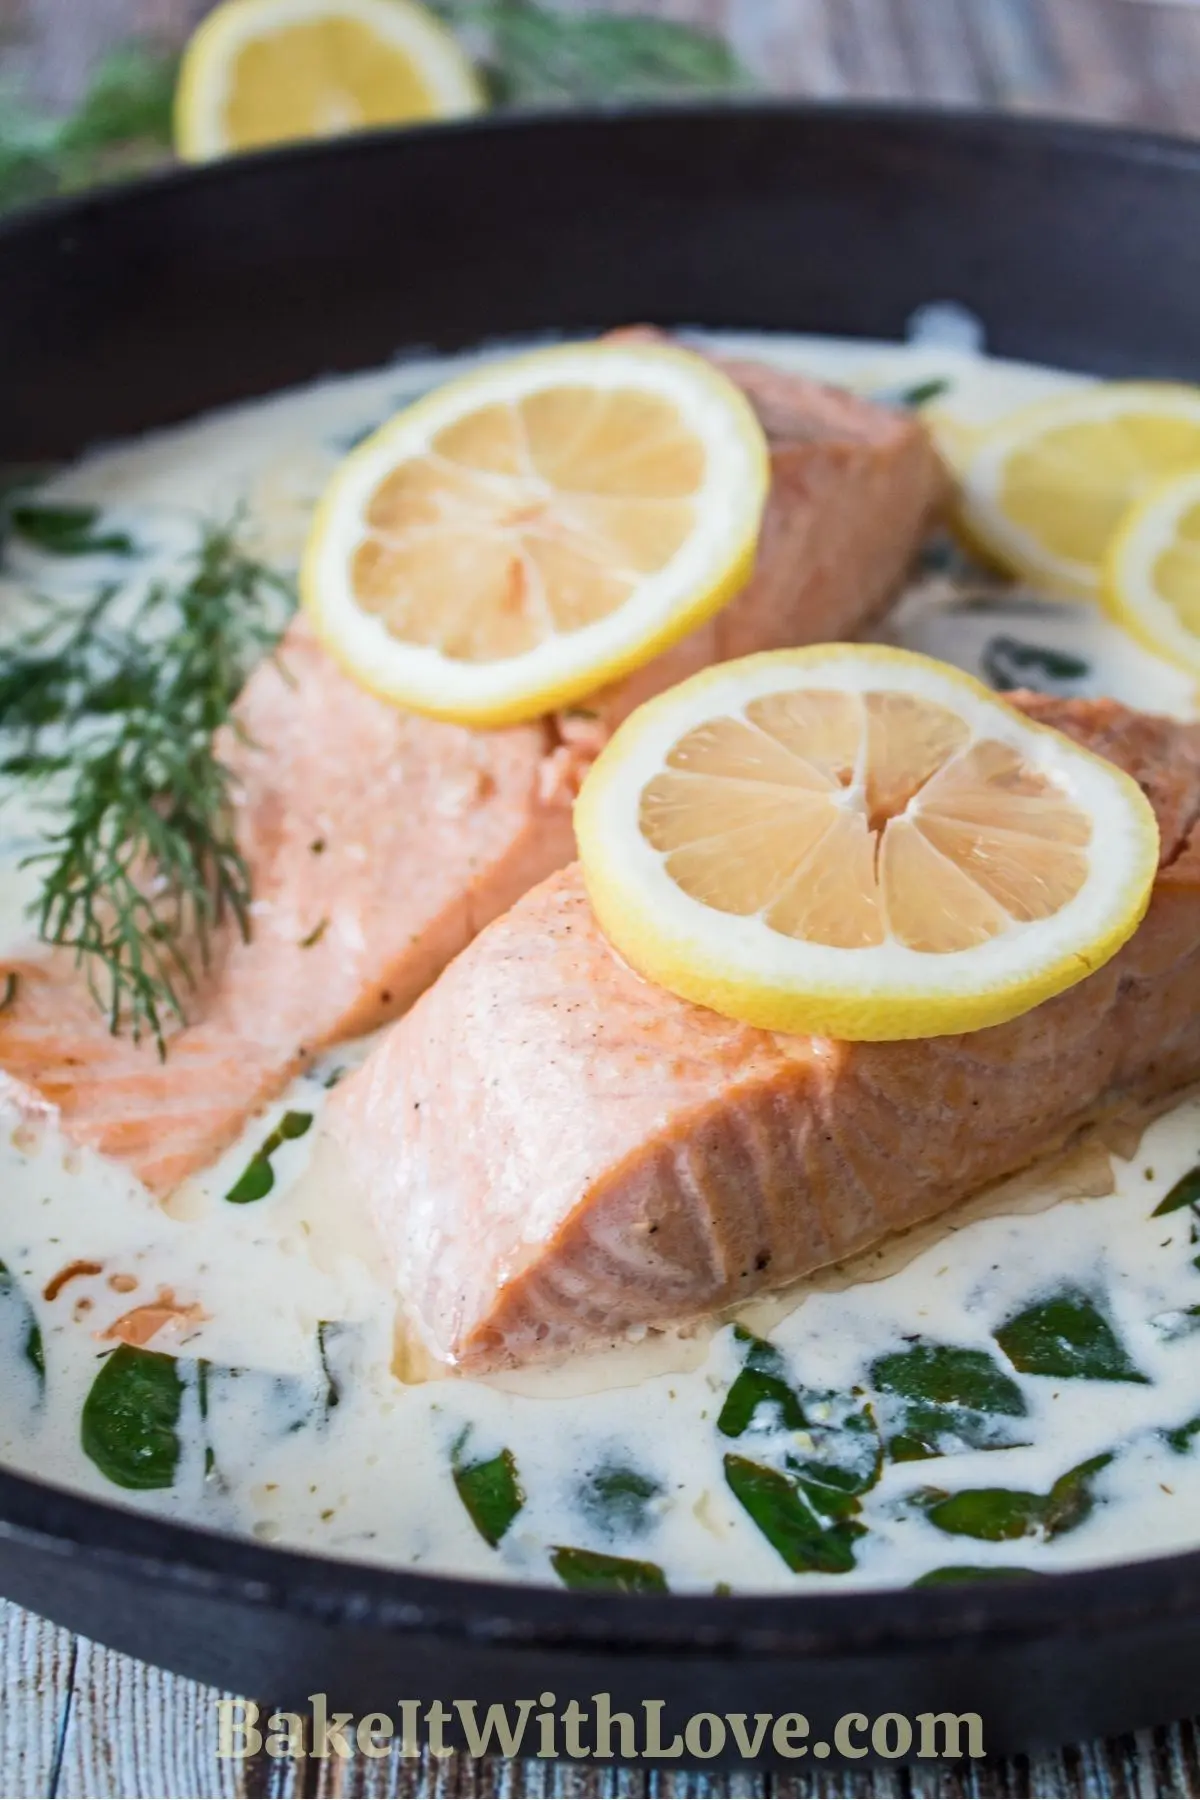 Perfectly pan-fried salmon in creamy white wine sauce with lemon slices and fresh dill weed.